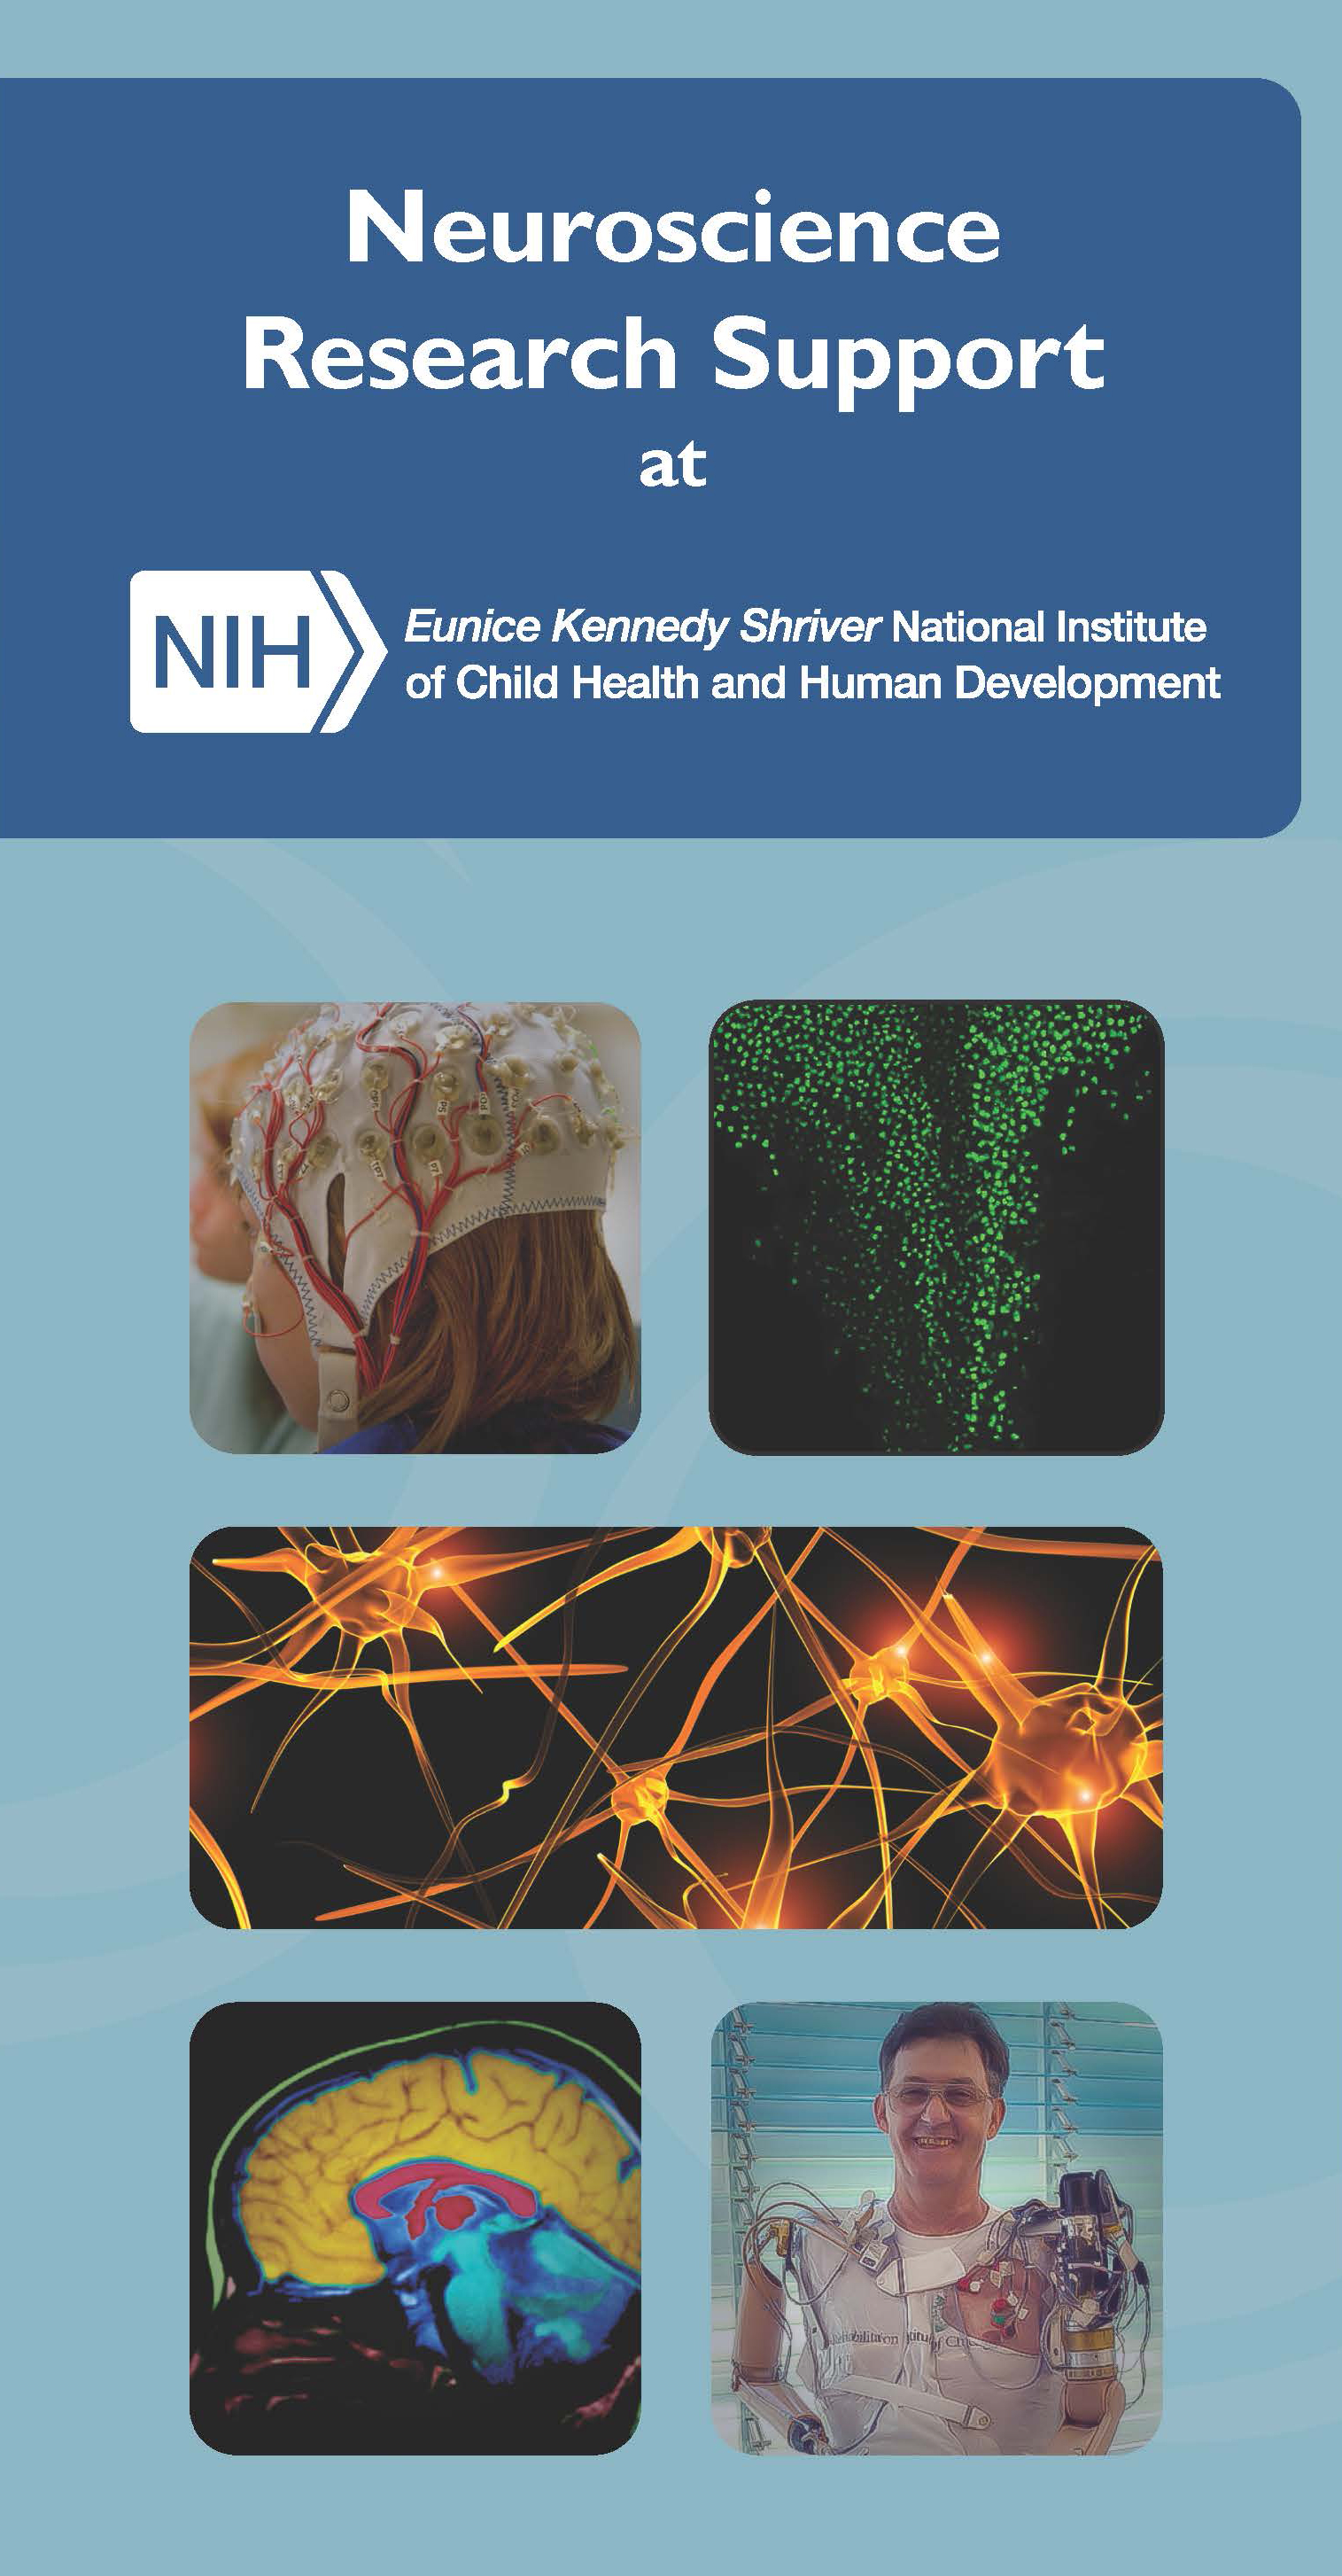 Cover of the Neuroscience Research Support at NICHD Handout